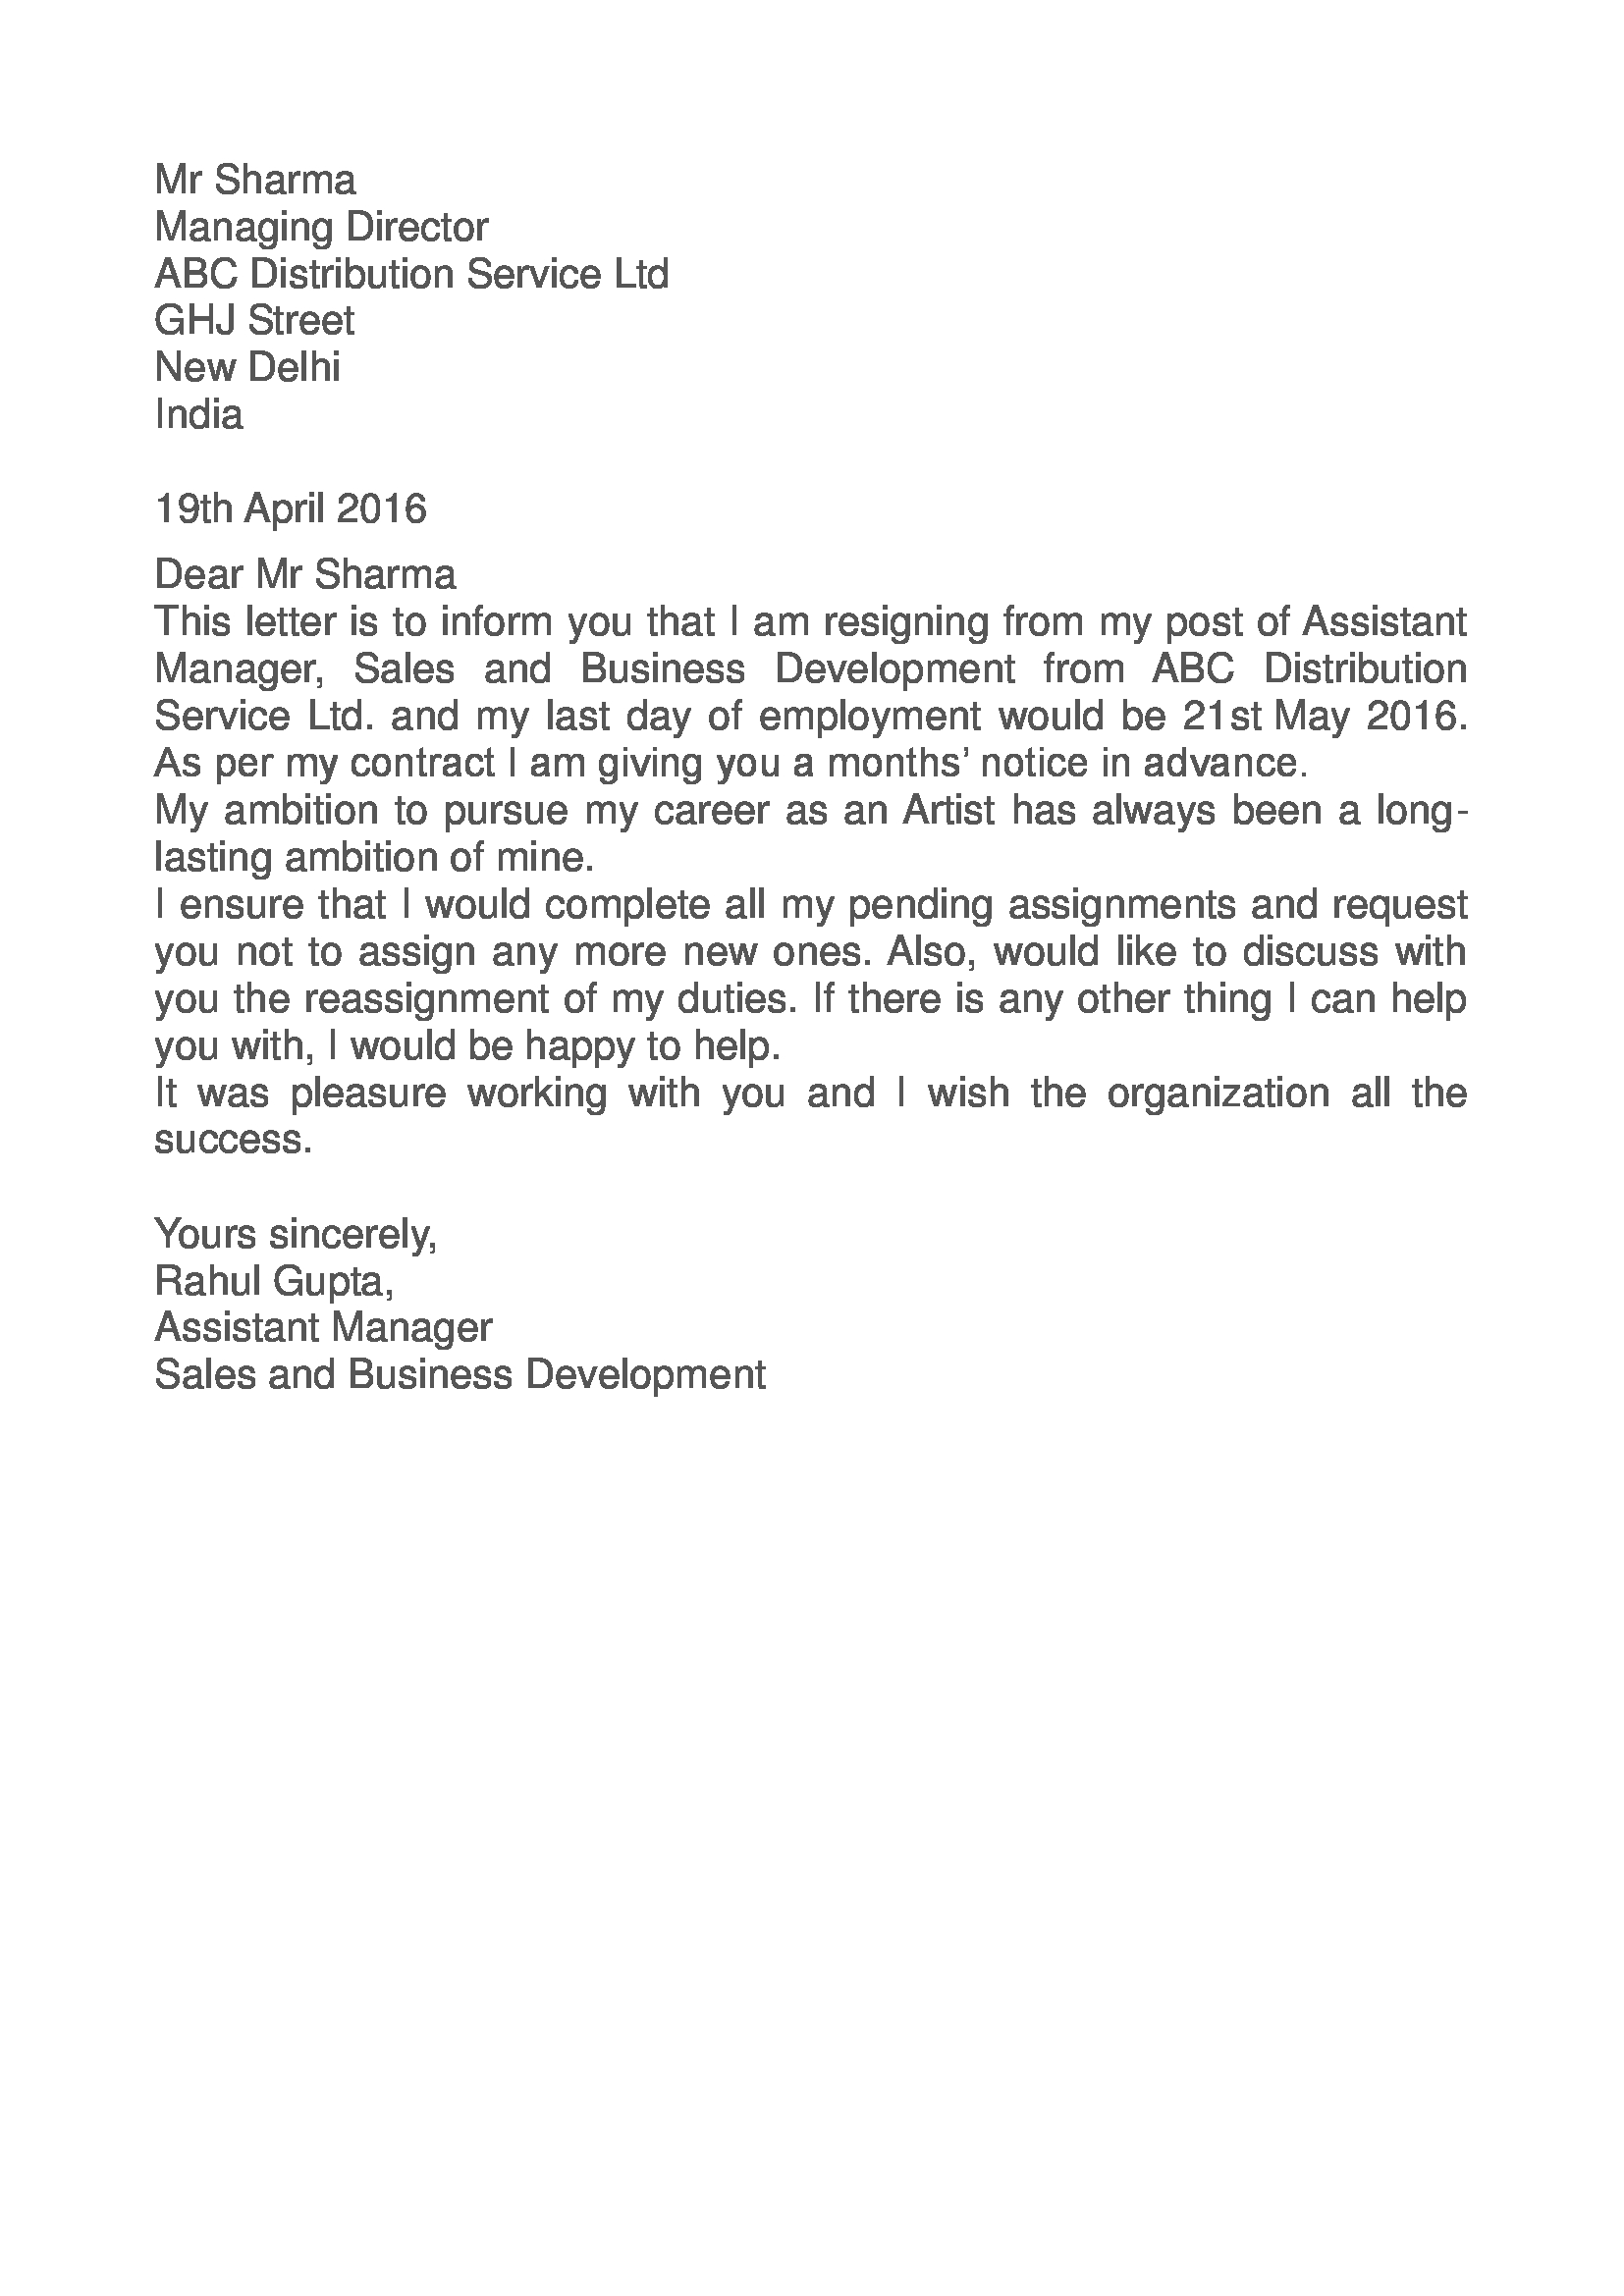 asistant manager resignation letter example